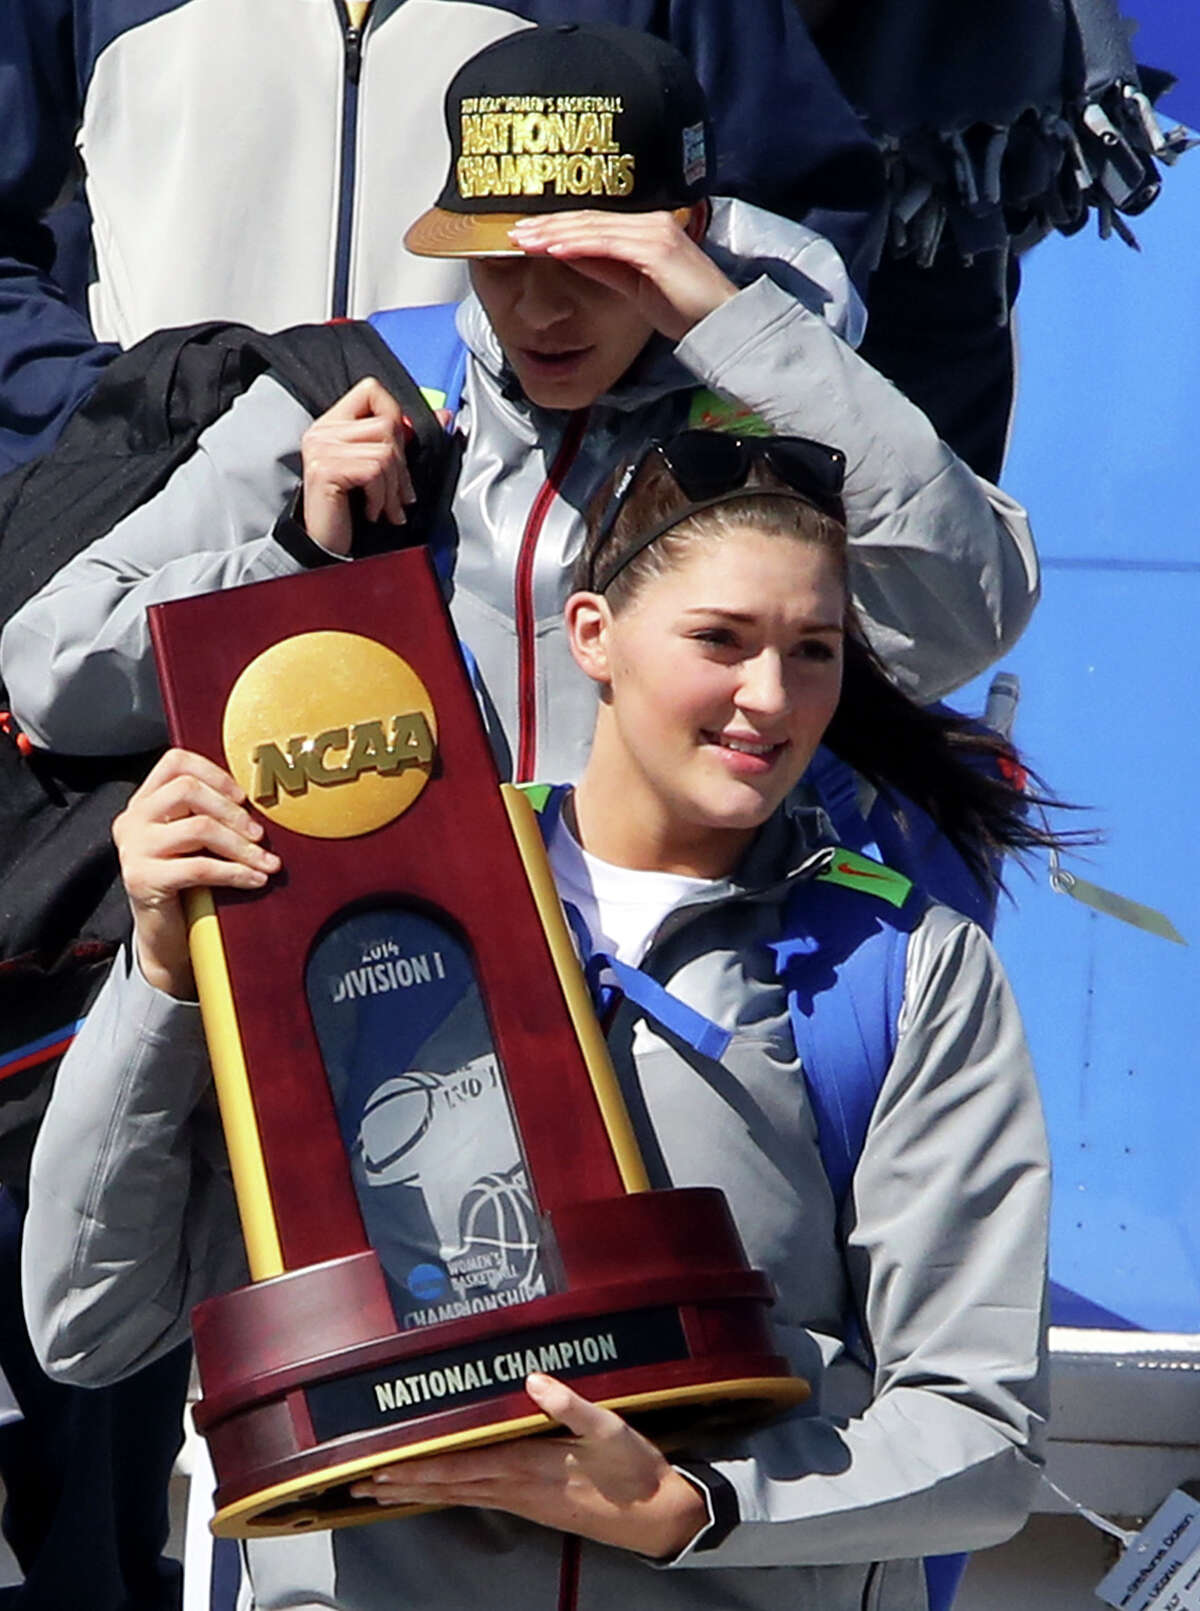 Connecticut's Stephanie Dolson holds the NCAA National Championship Trophy to fans as the team arrives at Bradley International Airport in Windsor Locks, Conn., Wednesday, April 9, 2014, the day after the Huskies defeated Notre Dame to clinch their ninth national championship. (AP Photo/Journal Inquirer, Jared Ramsdell) MANDATORY CREDIT